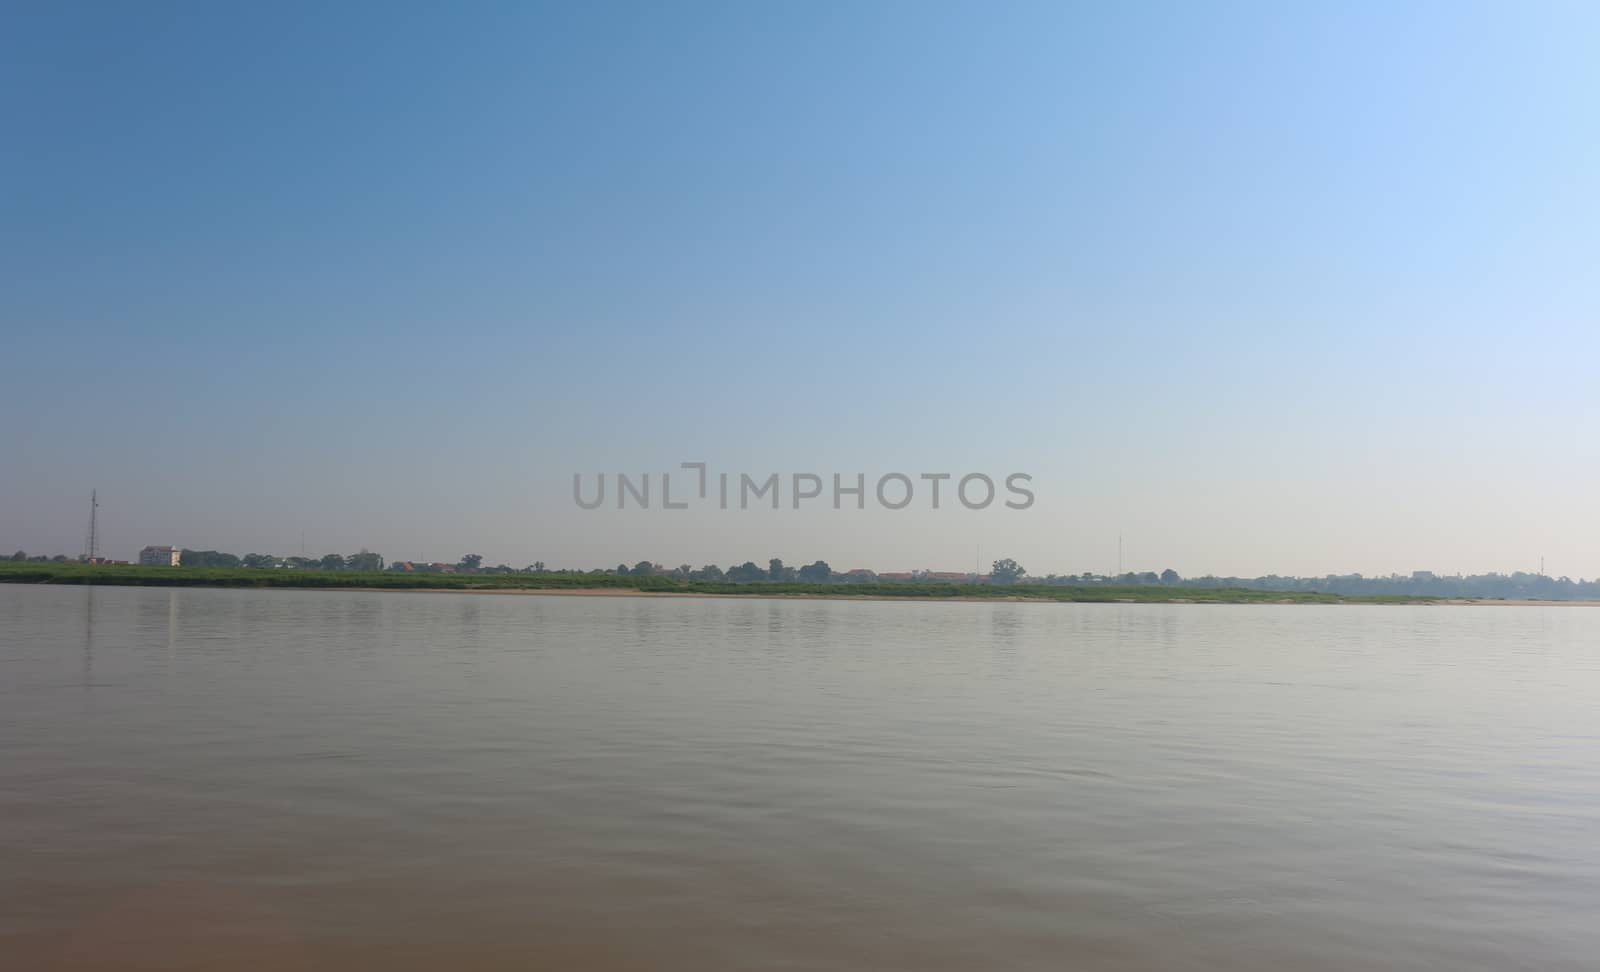 Beautiful landscape of the Mekong river in Thailand by N_u_T